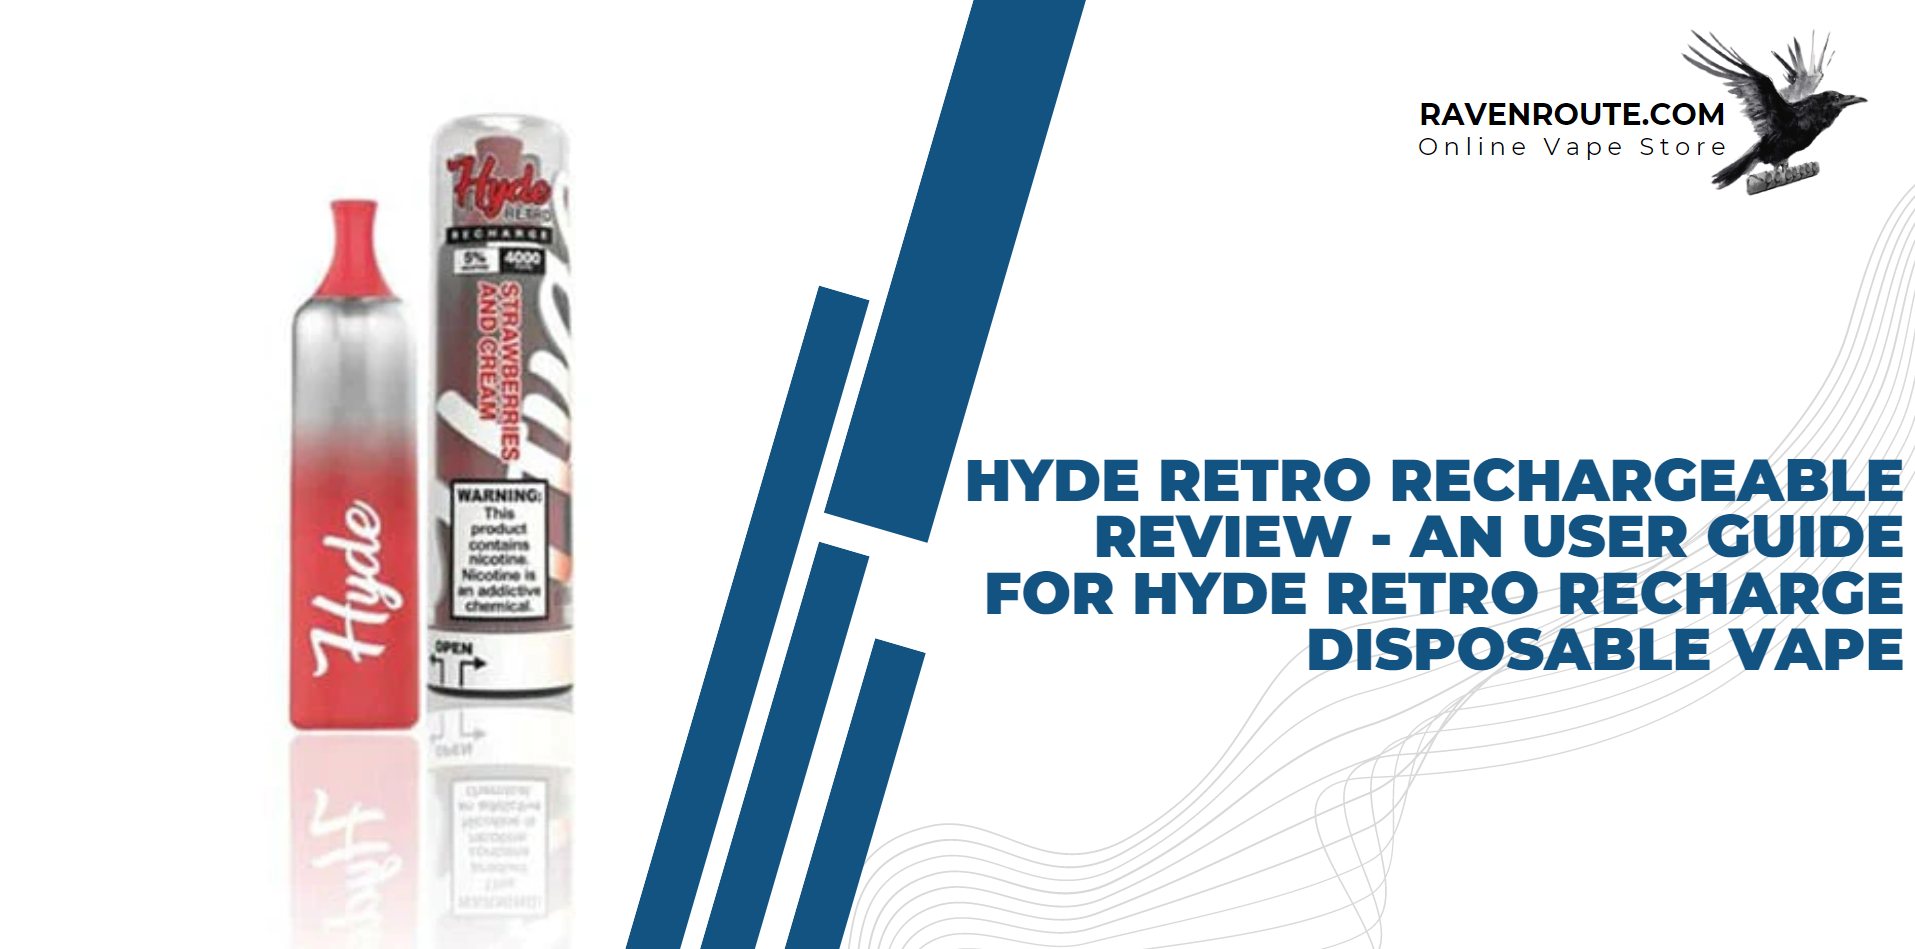 Hyde Retro Rechargeable Review - An User Guide for Hyde Retro Disposable Vape